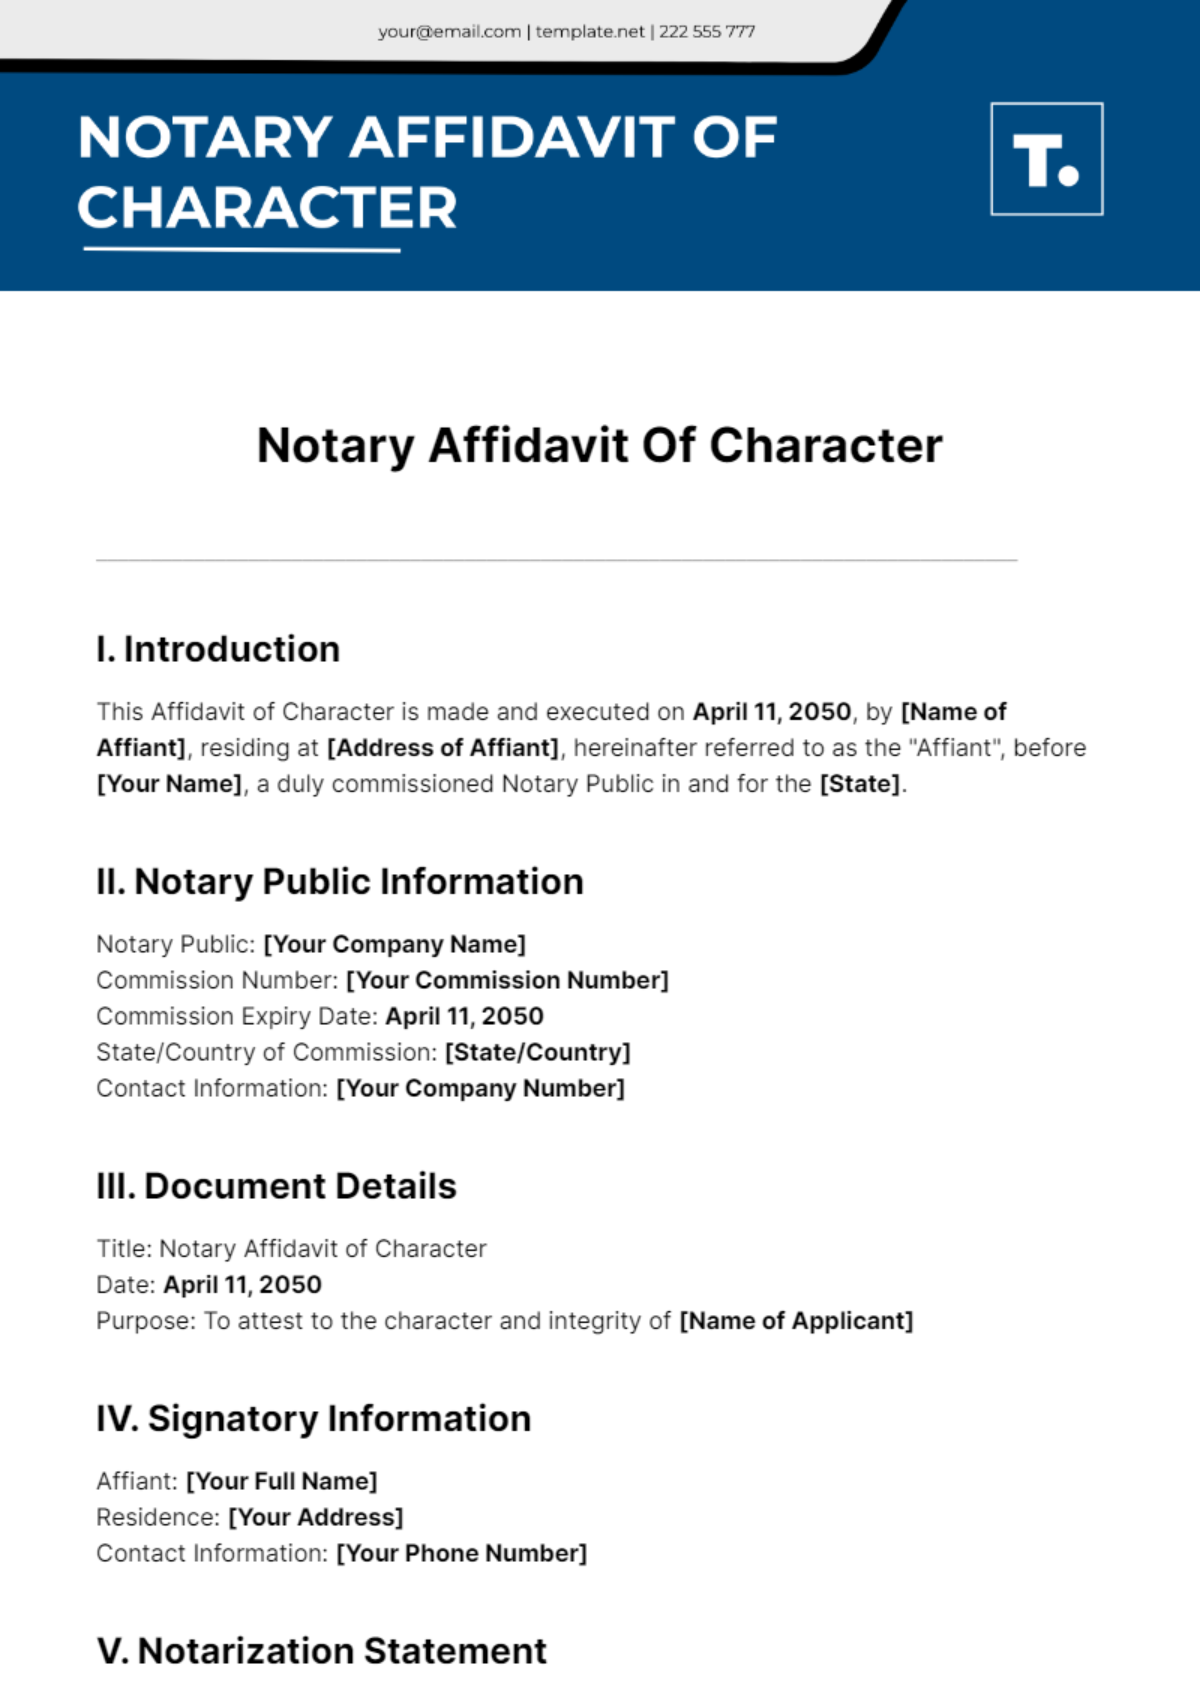 Notary Affidavit Of Character Template